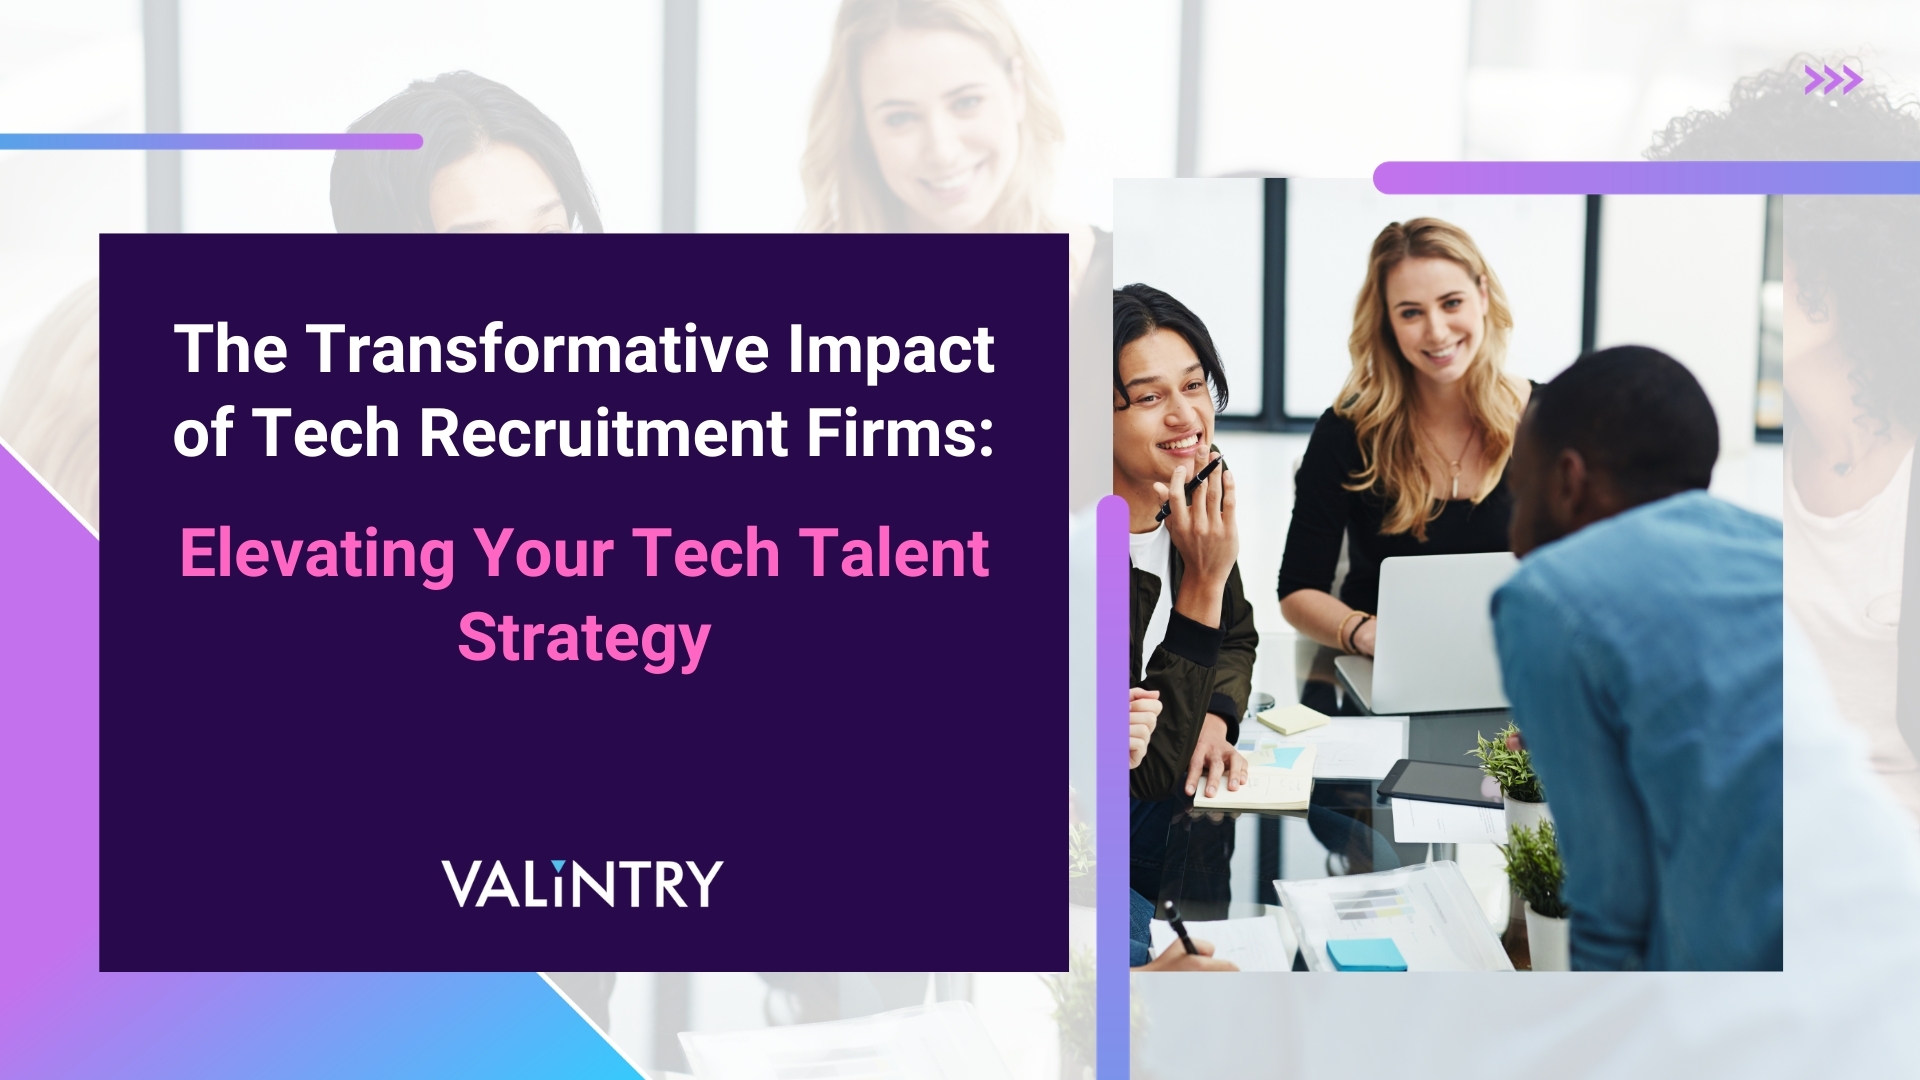 The Transformative Impact of Tech Recruitment Firms: Elevating Your Tech Talent Strategy - VALiNTRY